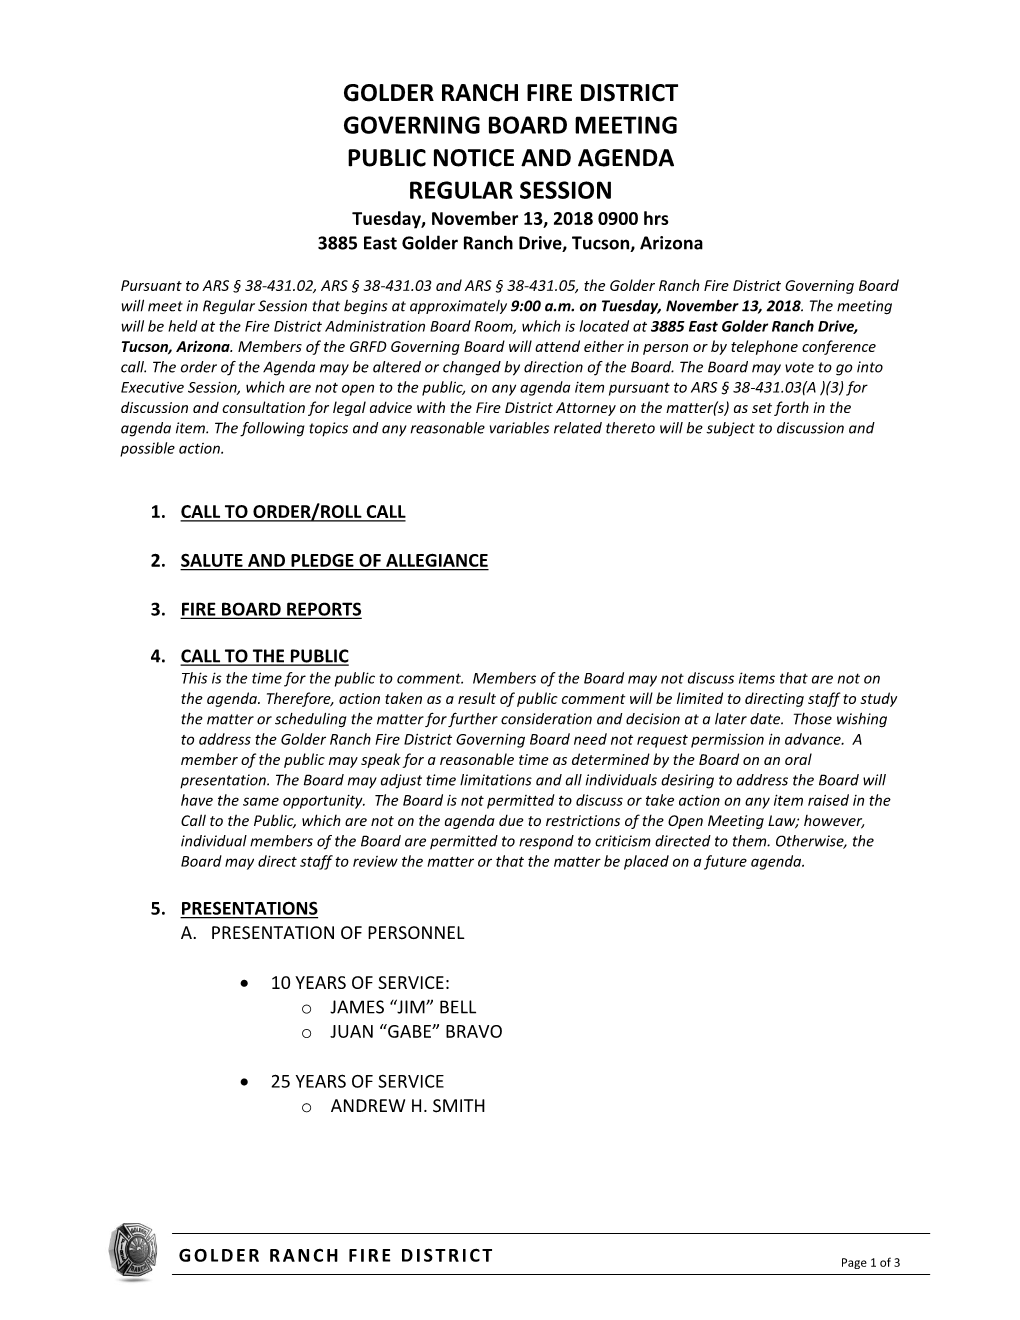 Golder Ranch Fire District Governing Board Meeting Public Notice and Agenda Regular Session